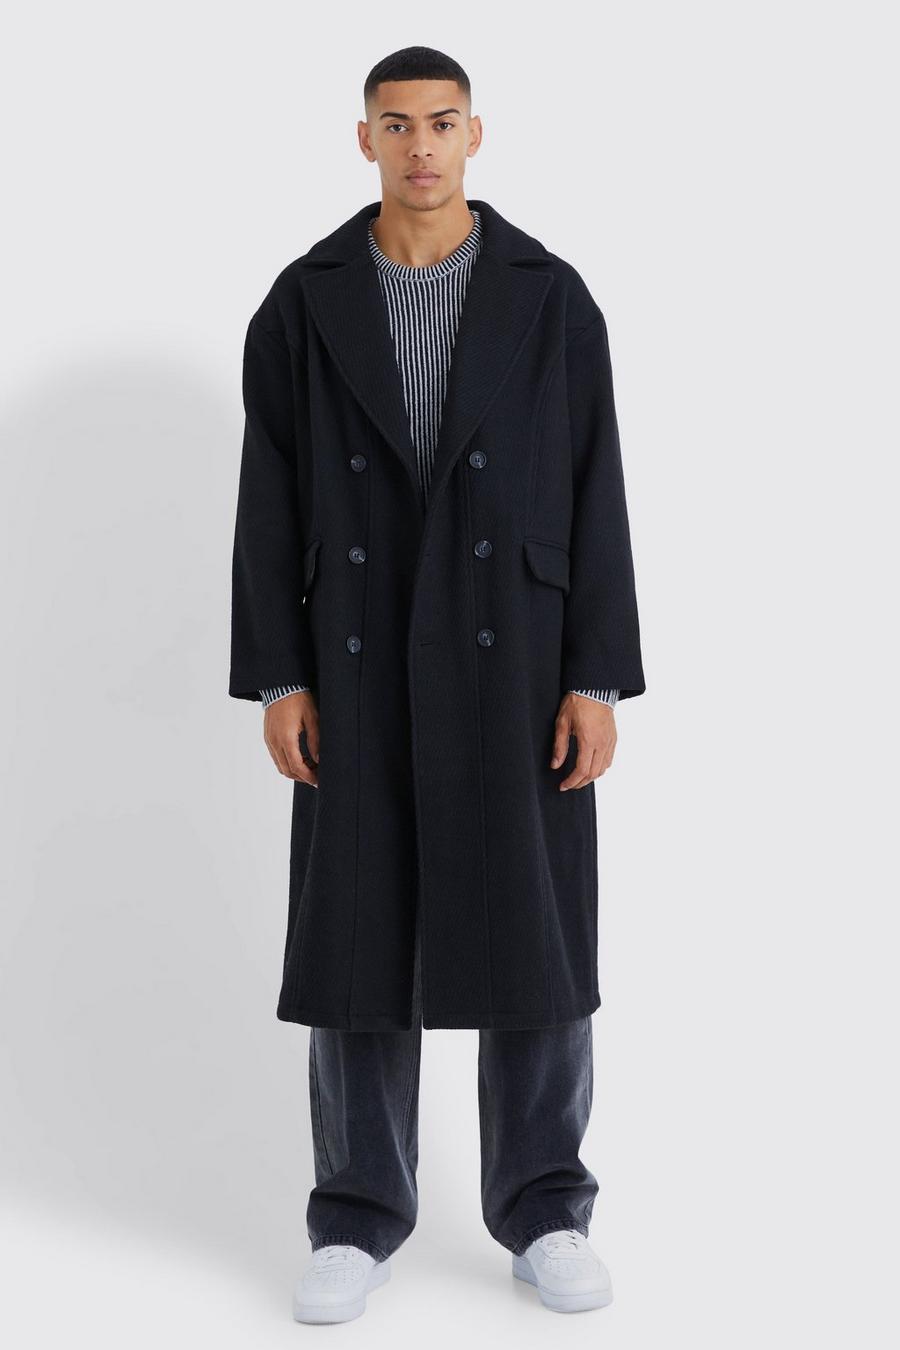 Black Wool Look Double Breasted Textured Overcoat